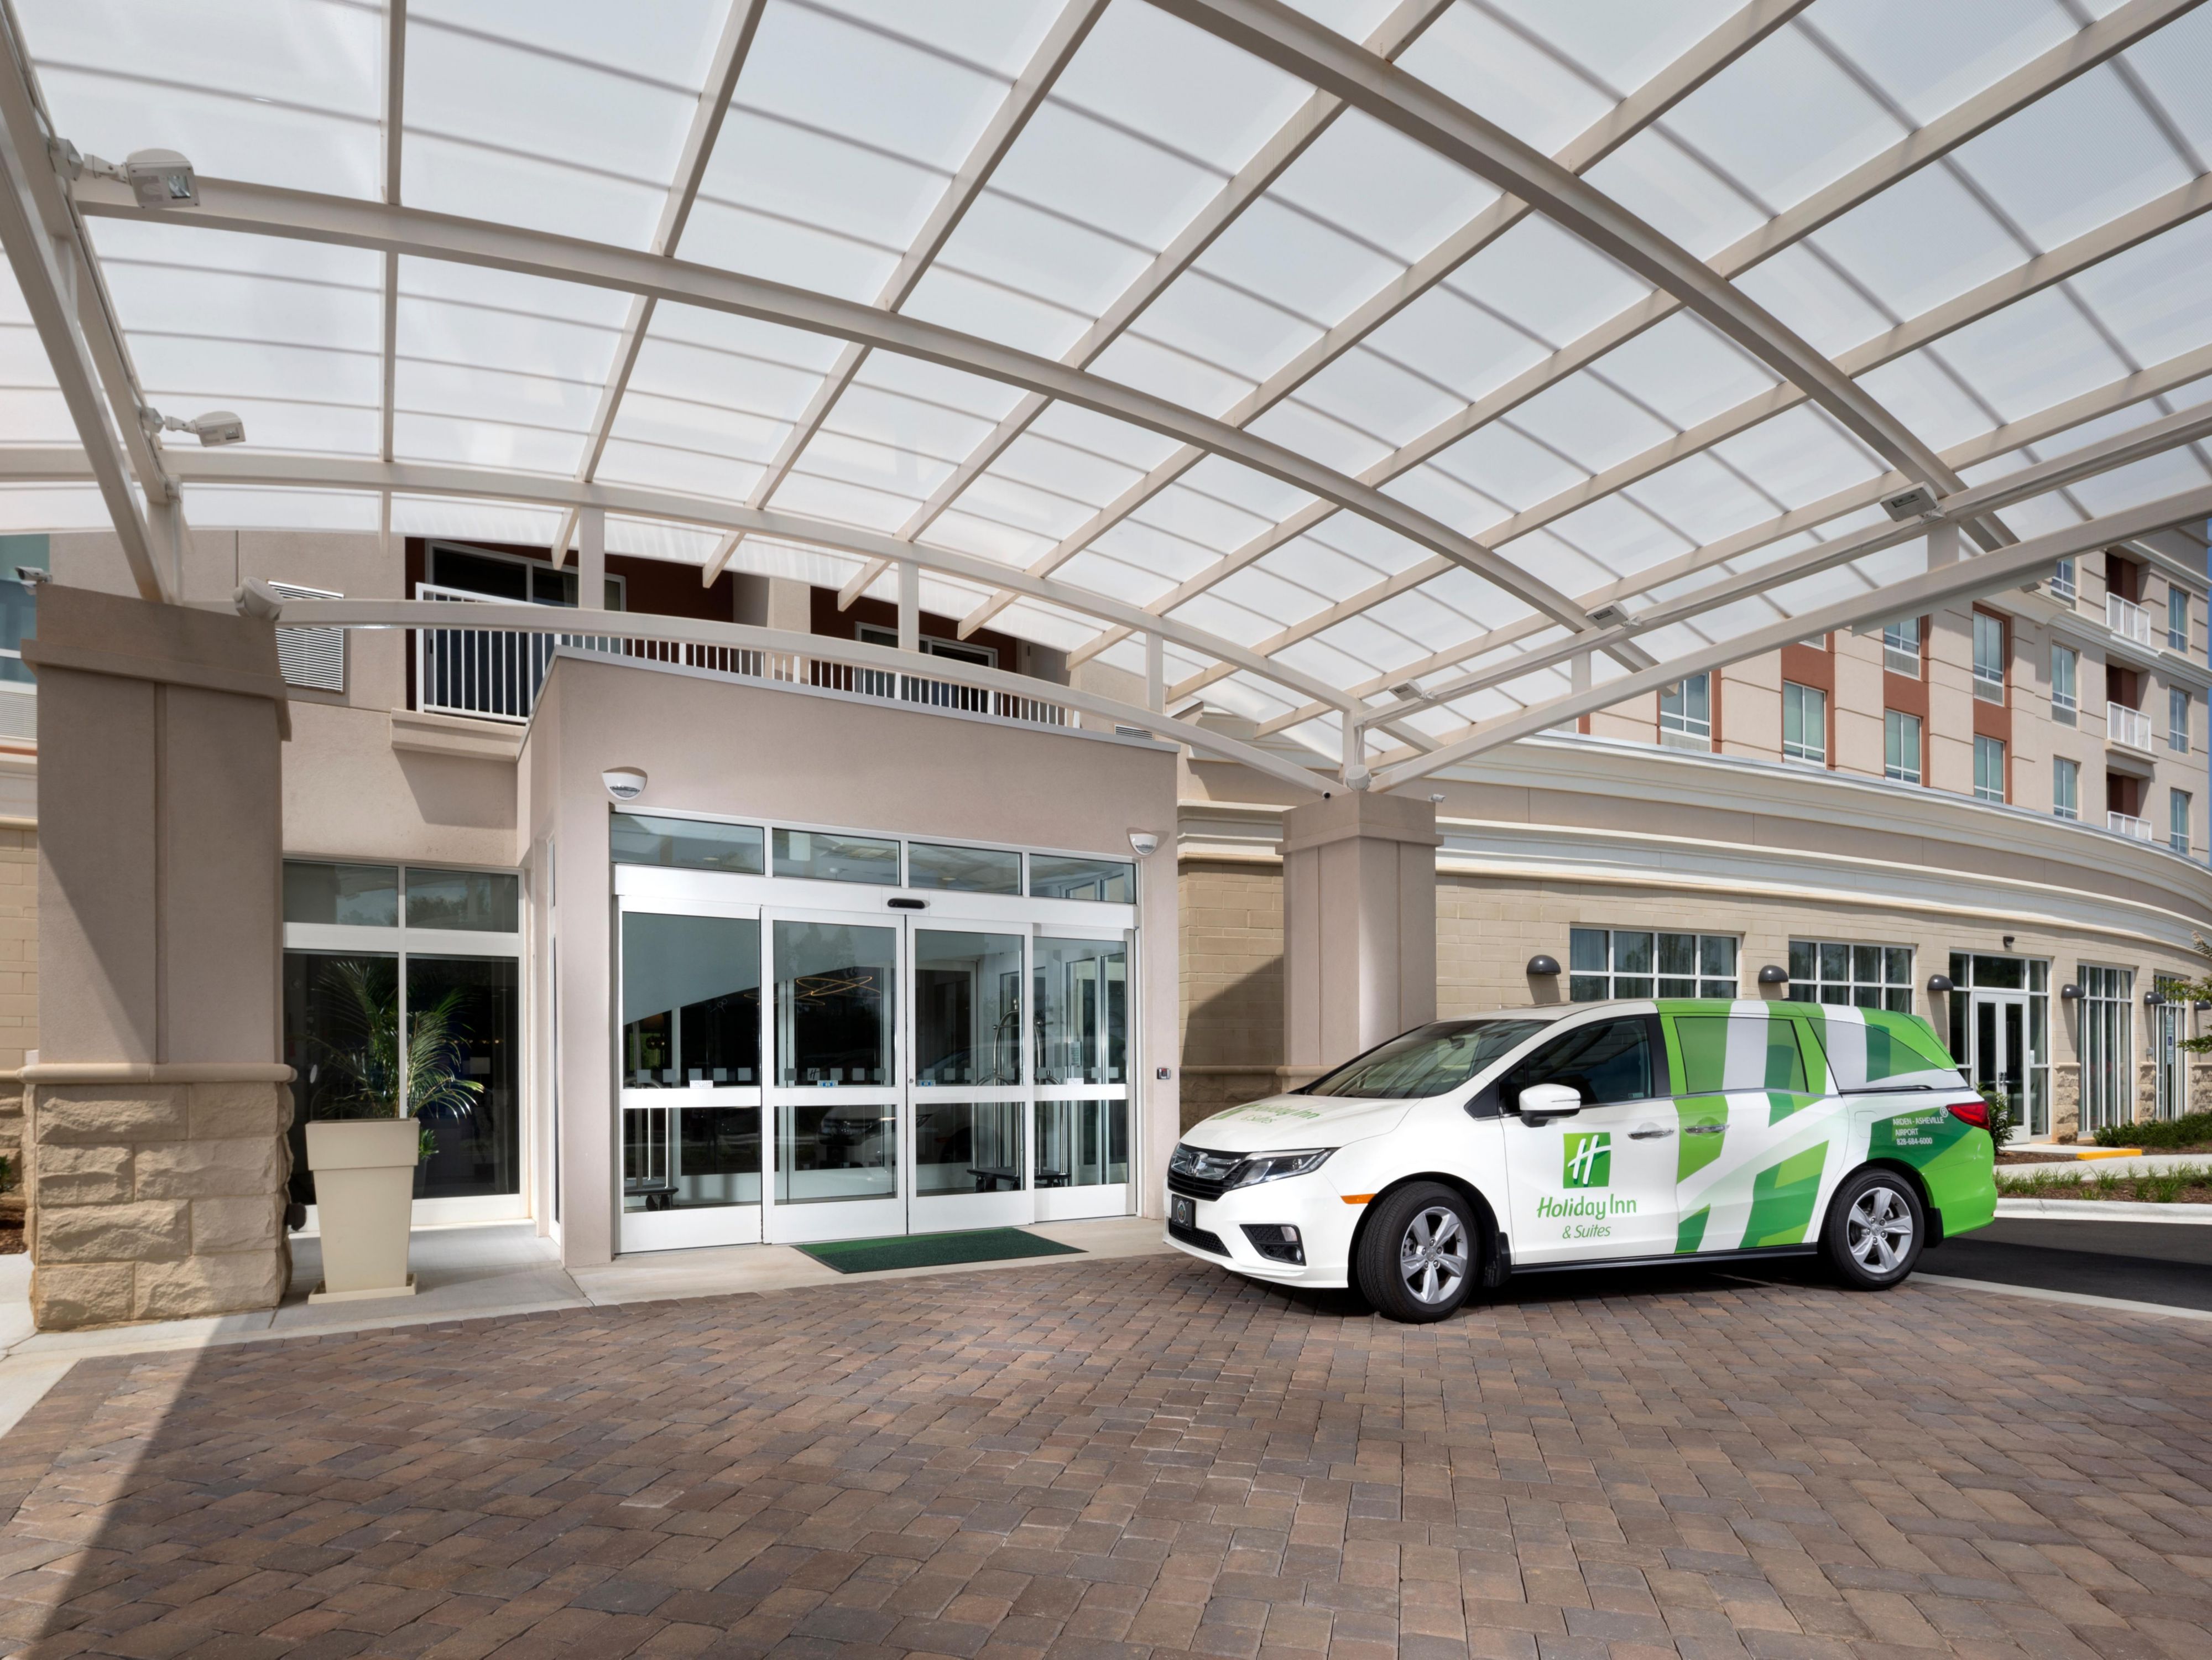 Here at the Holiday Inn & Suites Arden - Asheville Airport hotel, we make your travels even easier with our Airport Shuttle operating from 6:00 AM - 10:00 PM. Please be sure to contact the hotel front desk at least 24 hours in advance to confirm your route and commute needs and we thank you for staying with us!